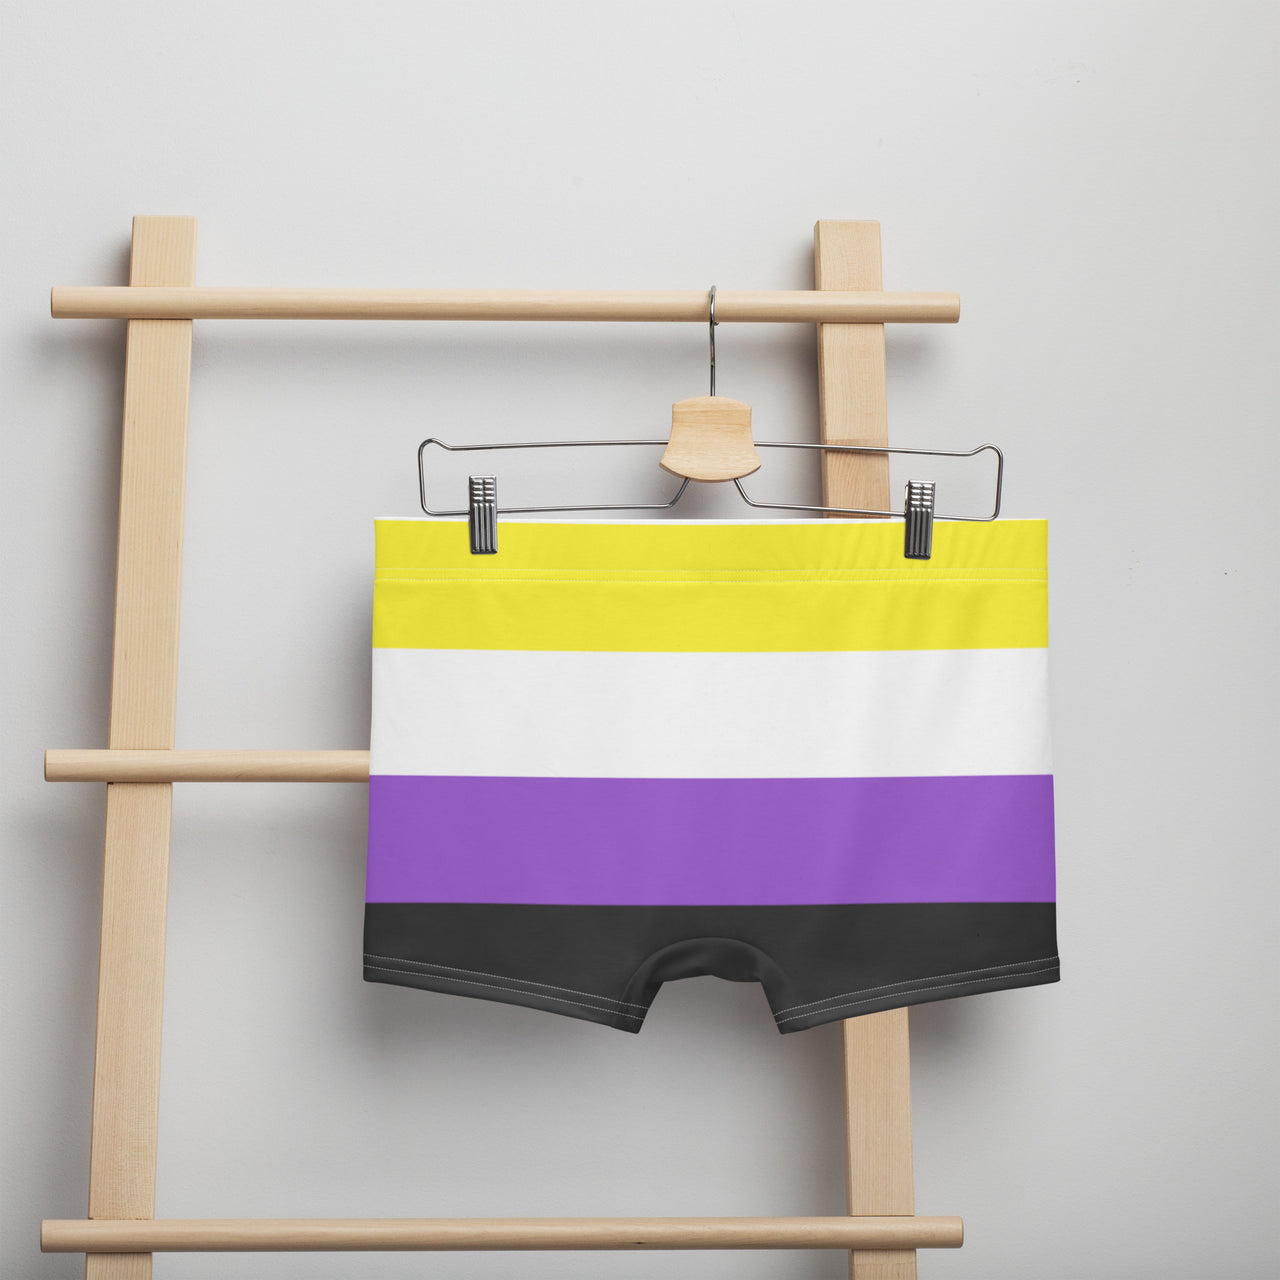 Non Binary Flag LGBTQ Boxer for Her/Him or They/Them SHAVA